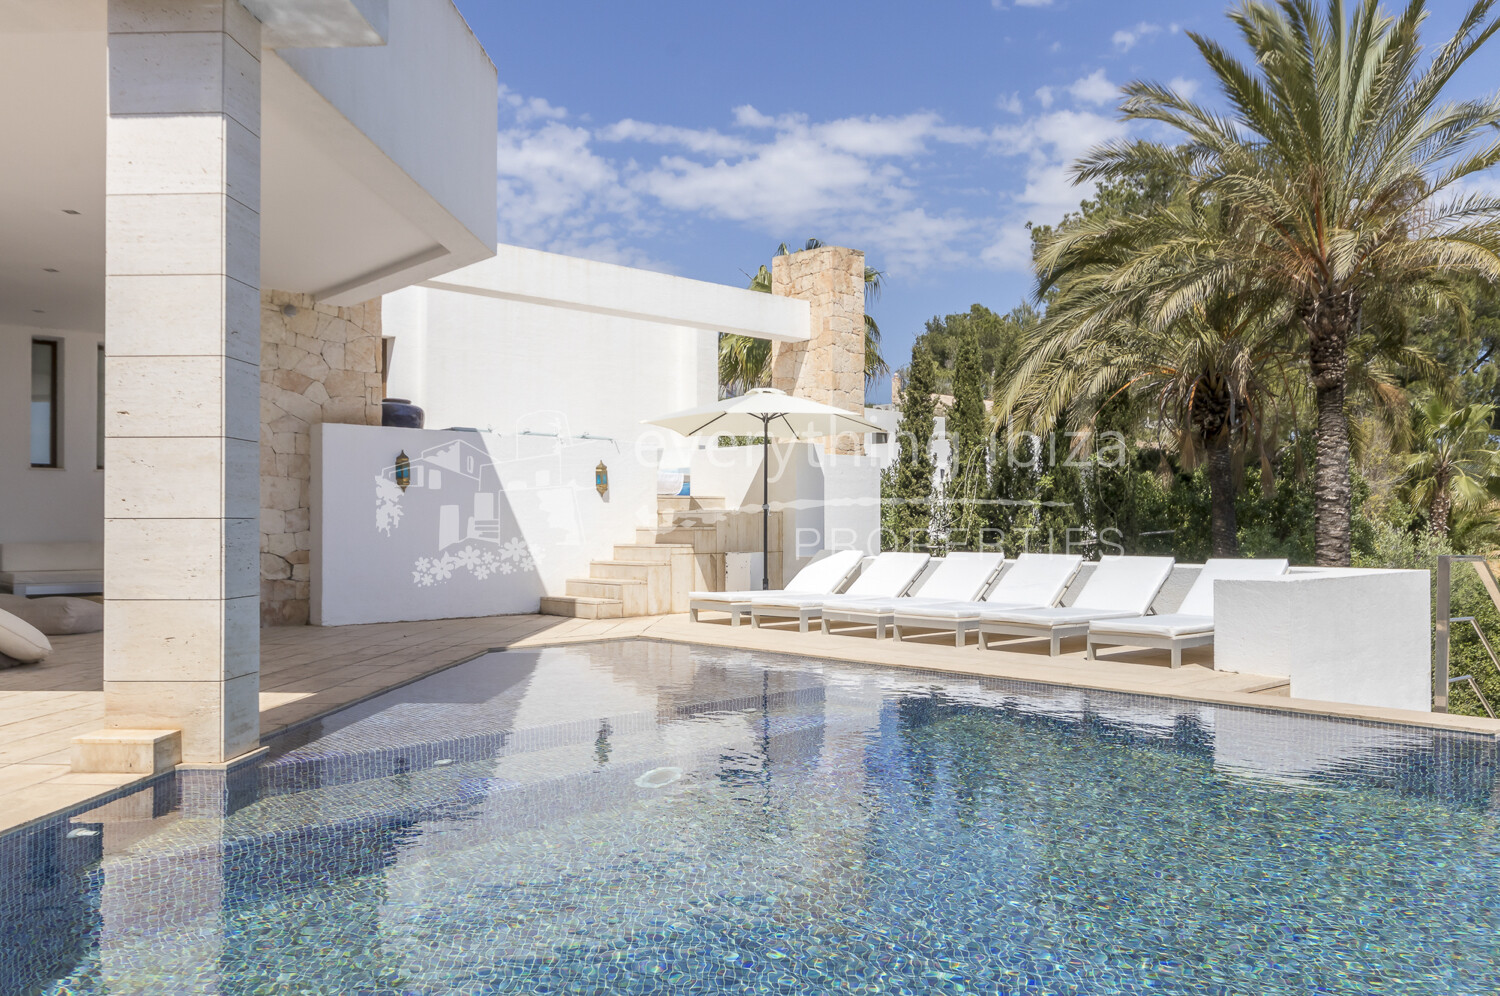 Stunning Contemporary Villa near Es Cubells with Elevated Sea Views, ref. 1686, on sale in Ibiza by everything ibiza Properties